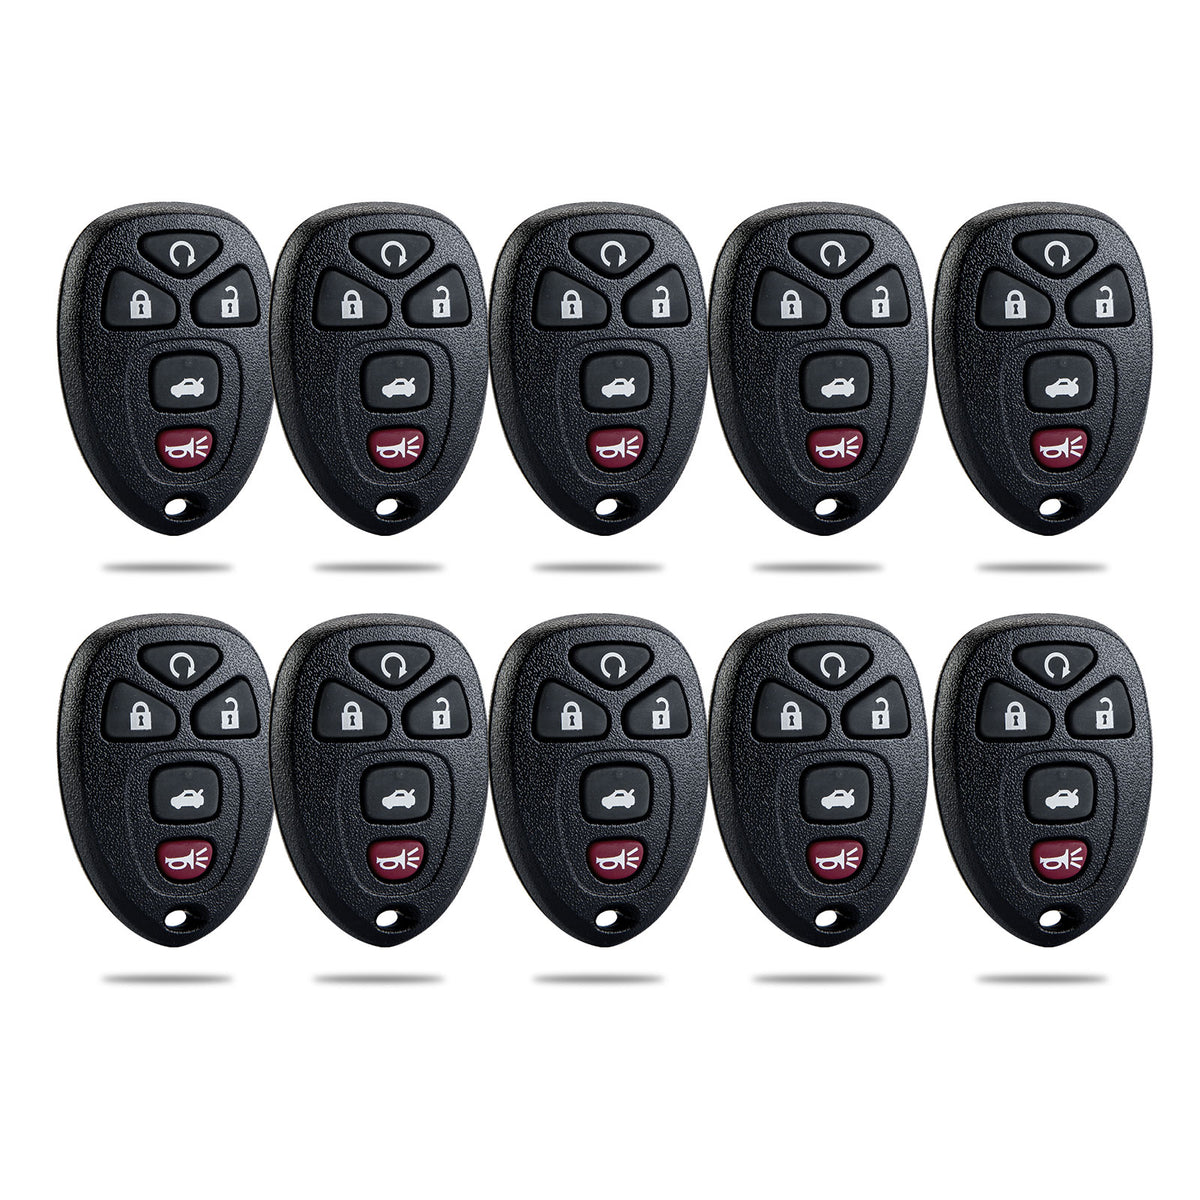 5 Button Keyless Entry Remote Replacement for 2006-2013 Chevy Impala Monte Carlo/Cadillac DTS/Buick Lucerne OUC60270  KR-C5RA